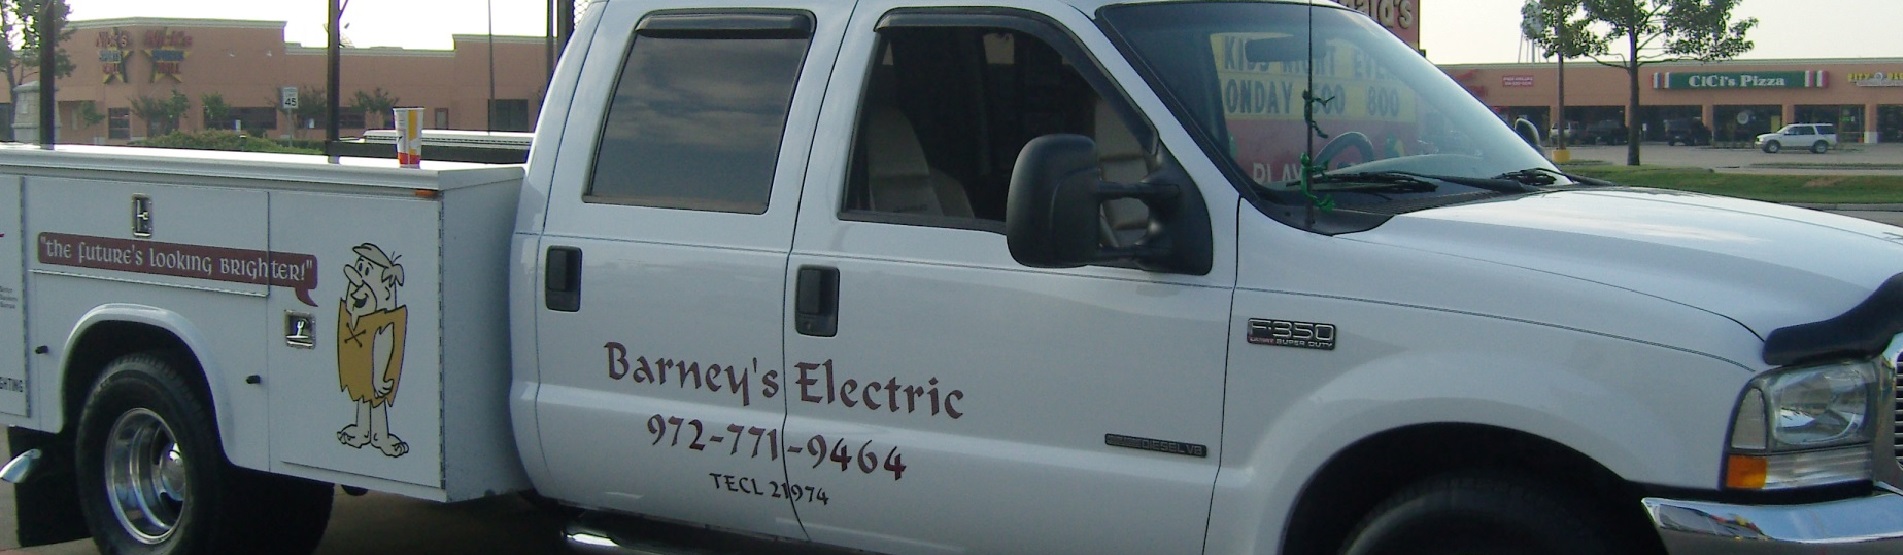 Commmercial Electrician Electrician Rockwall TX Barney's Electric Full Service Electrician Residential Commercial Retail and New Construction Wiring Repair Installation Service 24 Hour Emergency Services Master Electrician Rockwall Texas